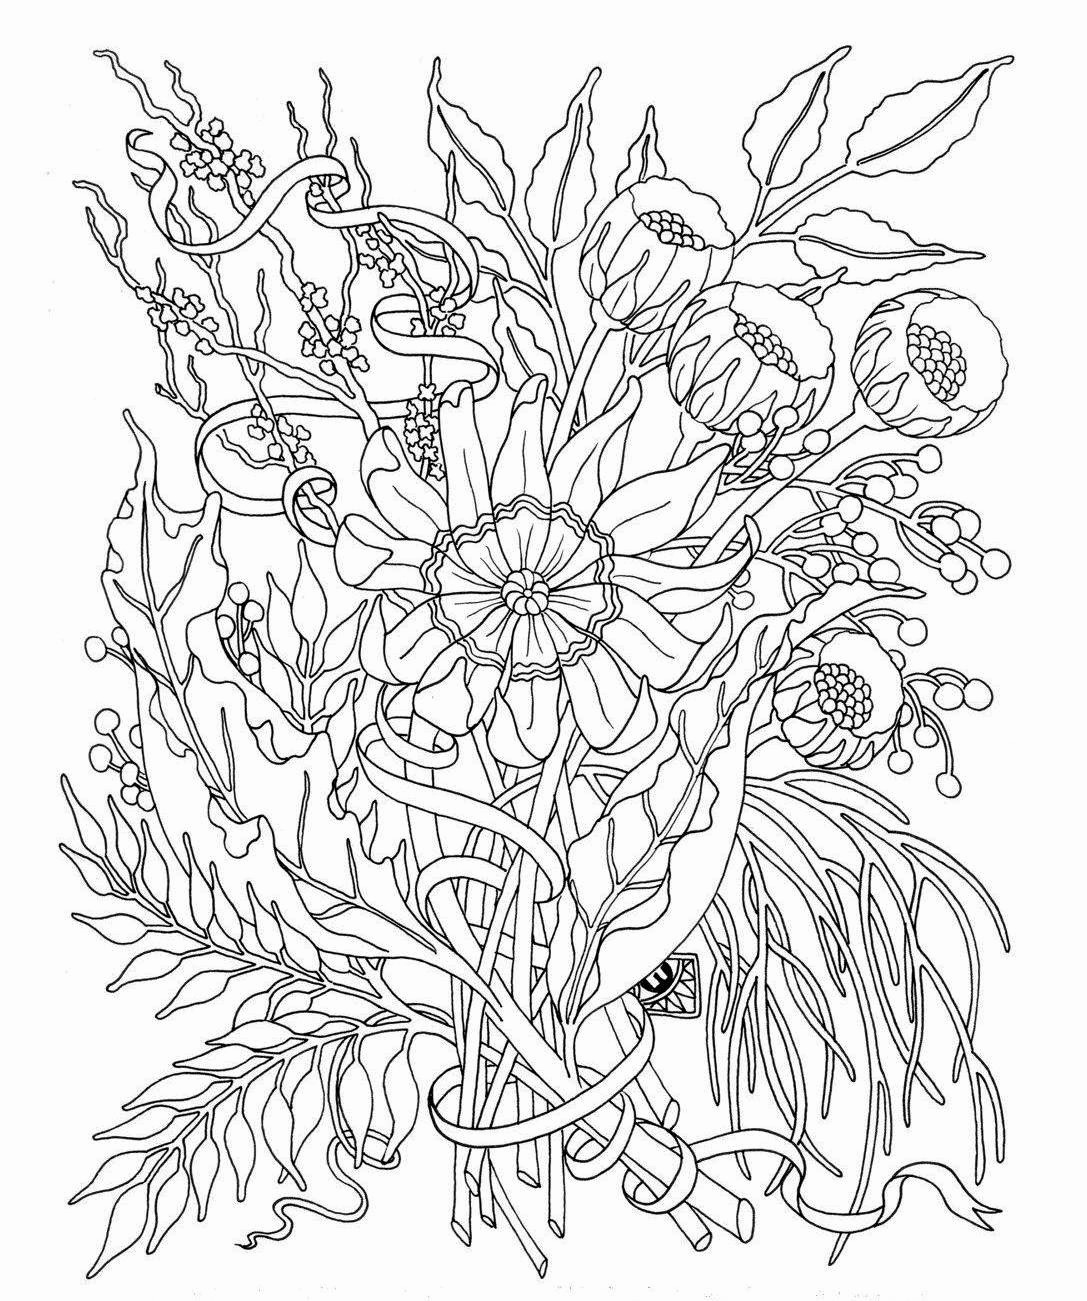 17 Lovely Star Wars Flower Vase 2024 free download star wars flower vase of baby coloring games to print with cool www coloring pages elegant cool vases flower vase coloring page